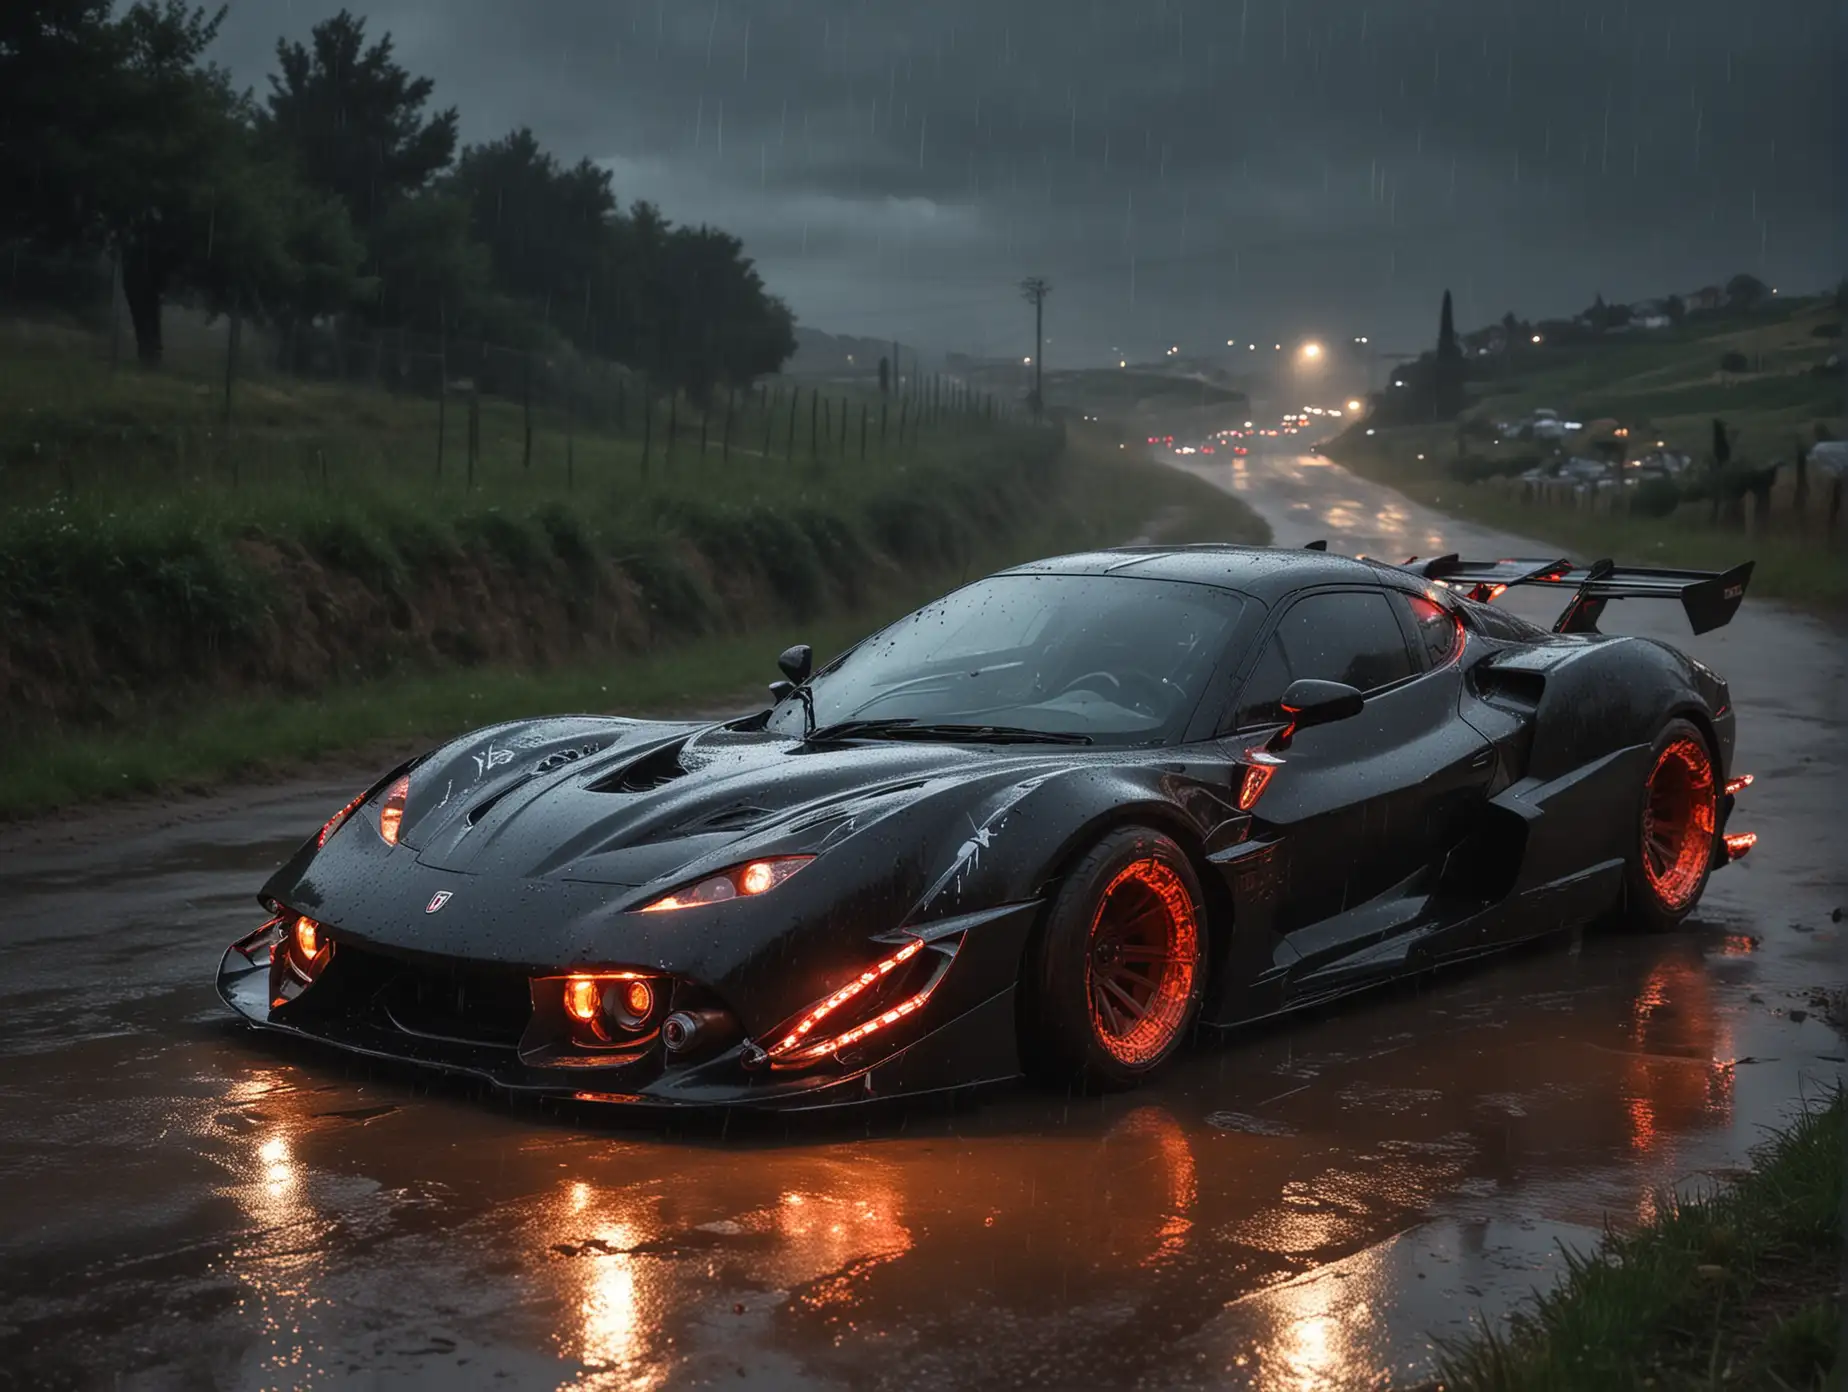 Create  futuristic  Italian with France cars  tuning type  Evil venom with big Wells  drifting at night in the Downhill background black dark color rear view from far away raining with fire add lightning marks on the body of car